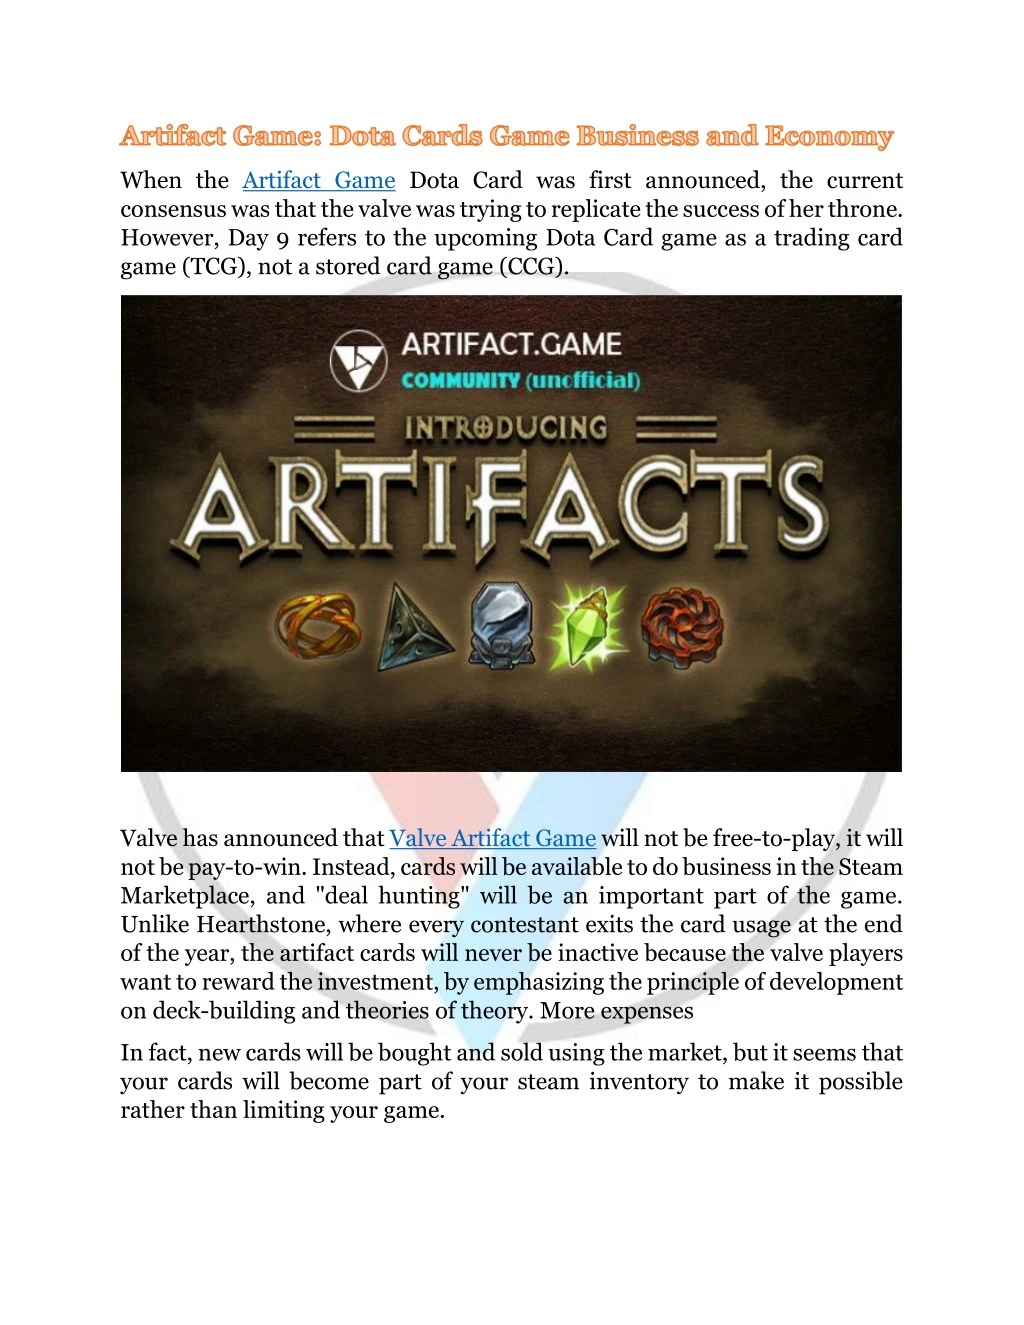 when the artifact game dota card was first